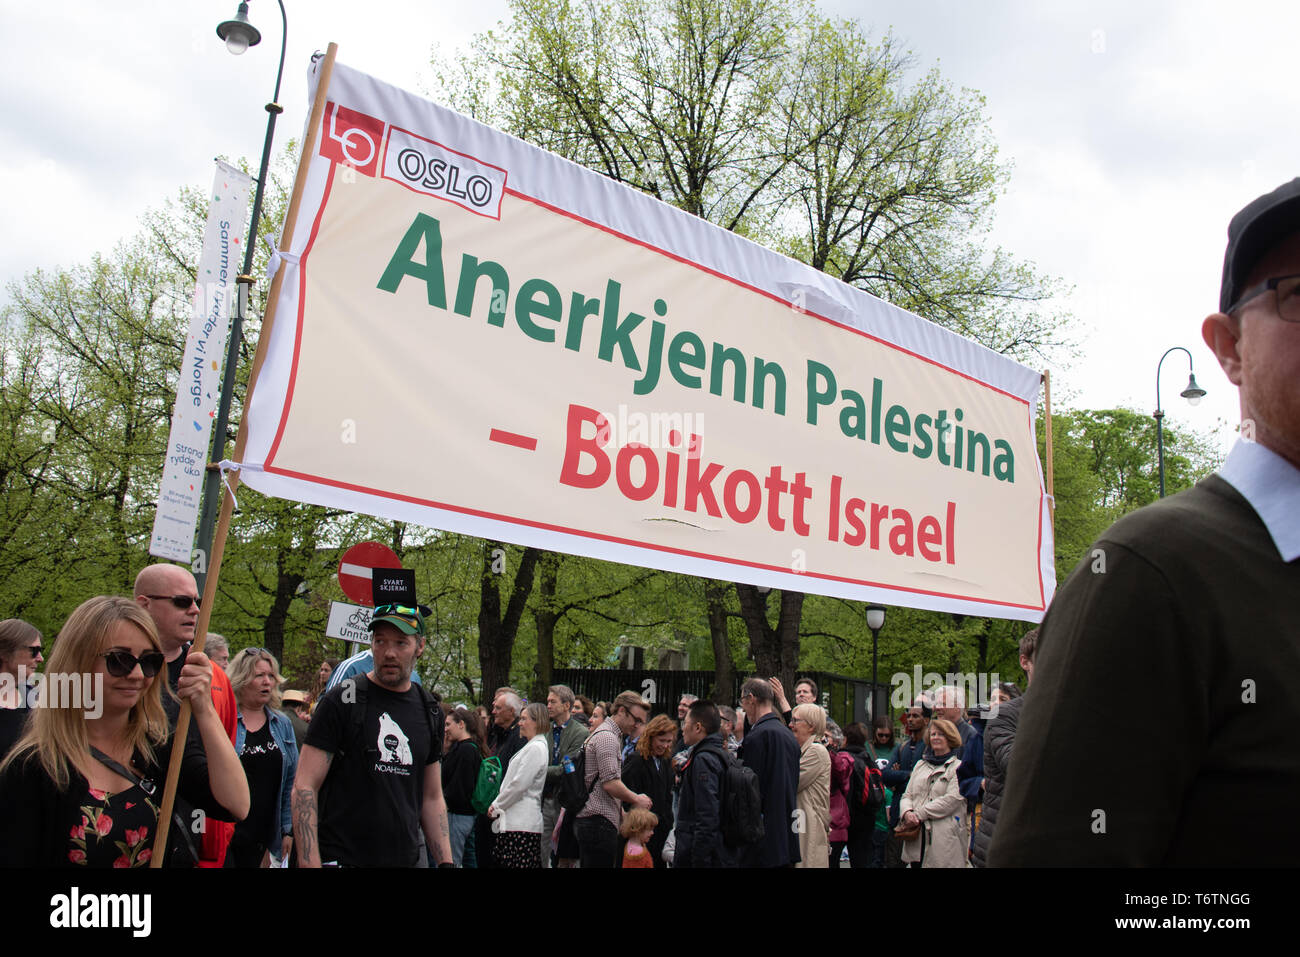 Marchers carry a banner reading 'Recognize Palestine - Boycott Israel' during a May Day march in Oslo, Norway, May 1, 2018. Stock Photo